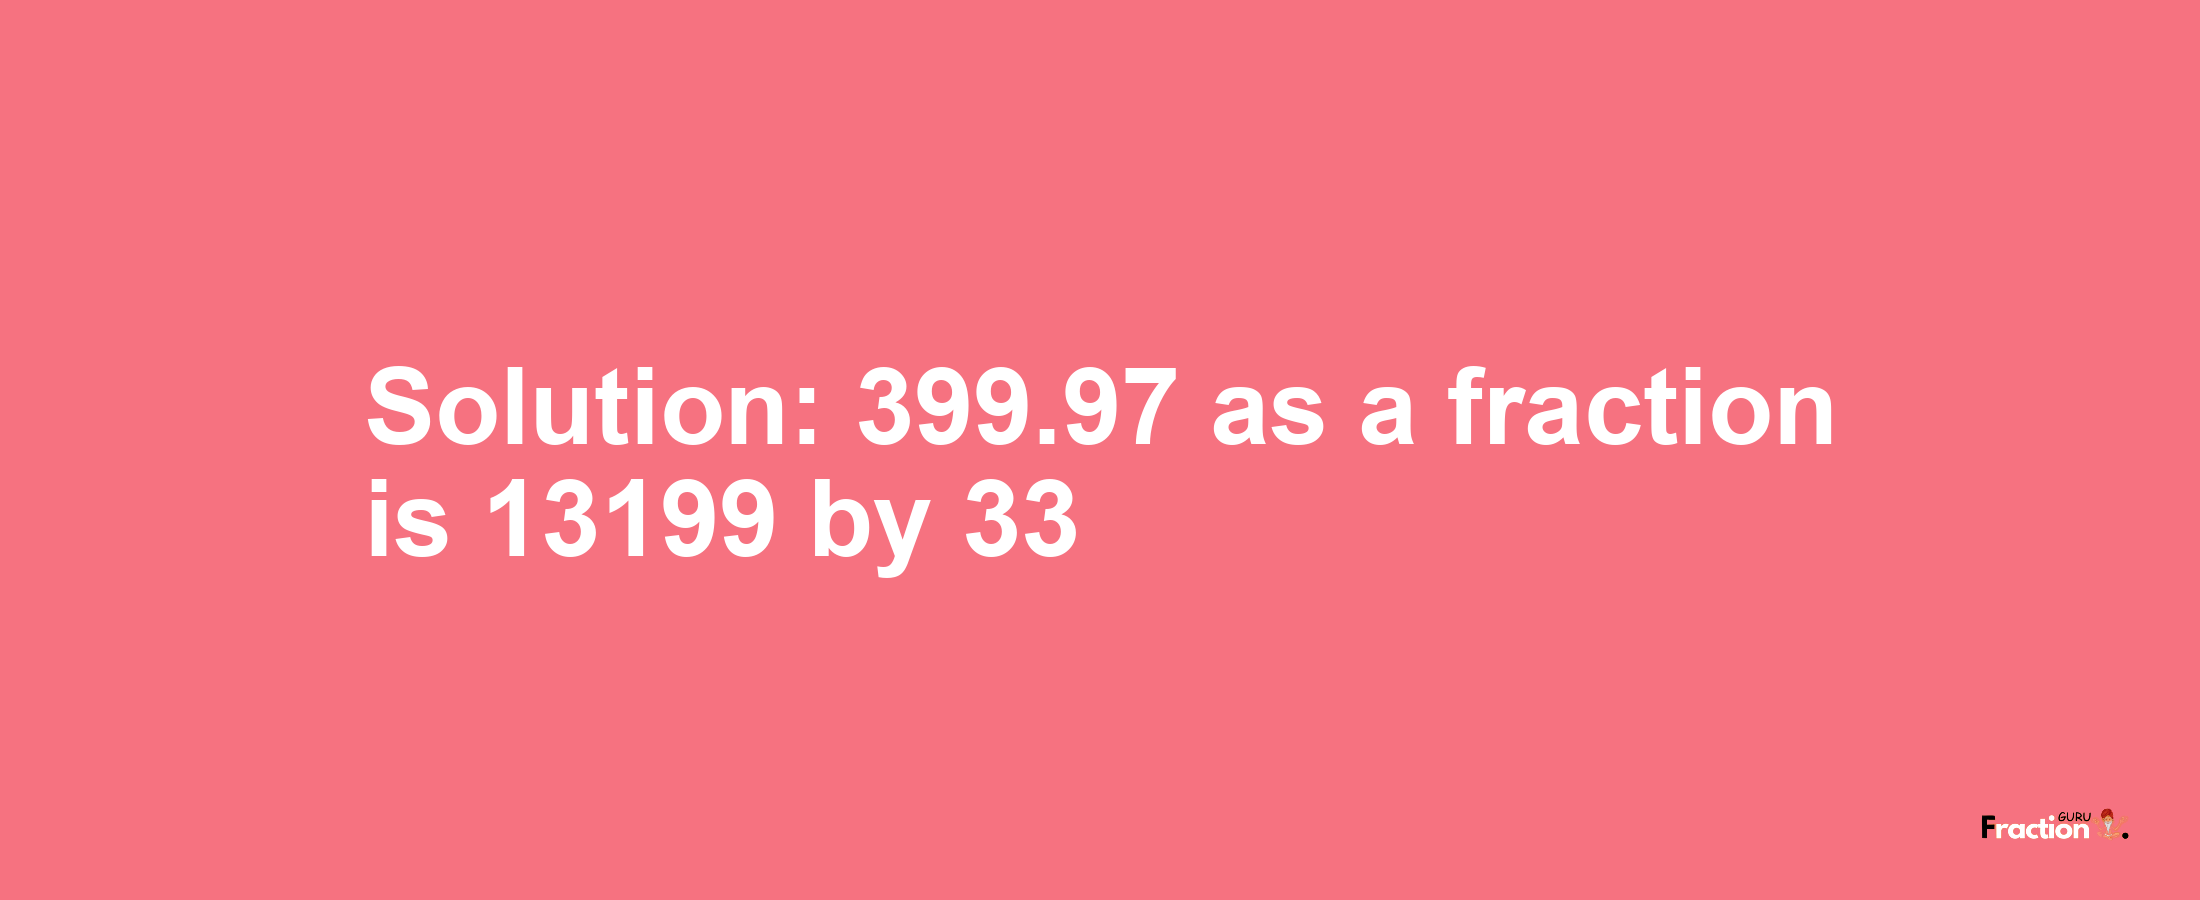 Solution:399.97 as a fraction is 13199/33